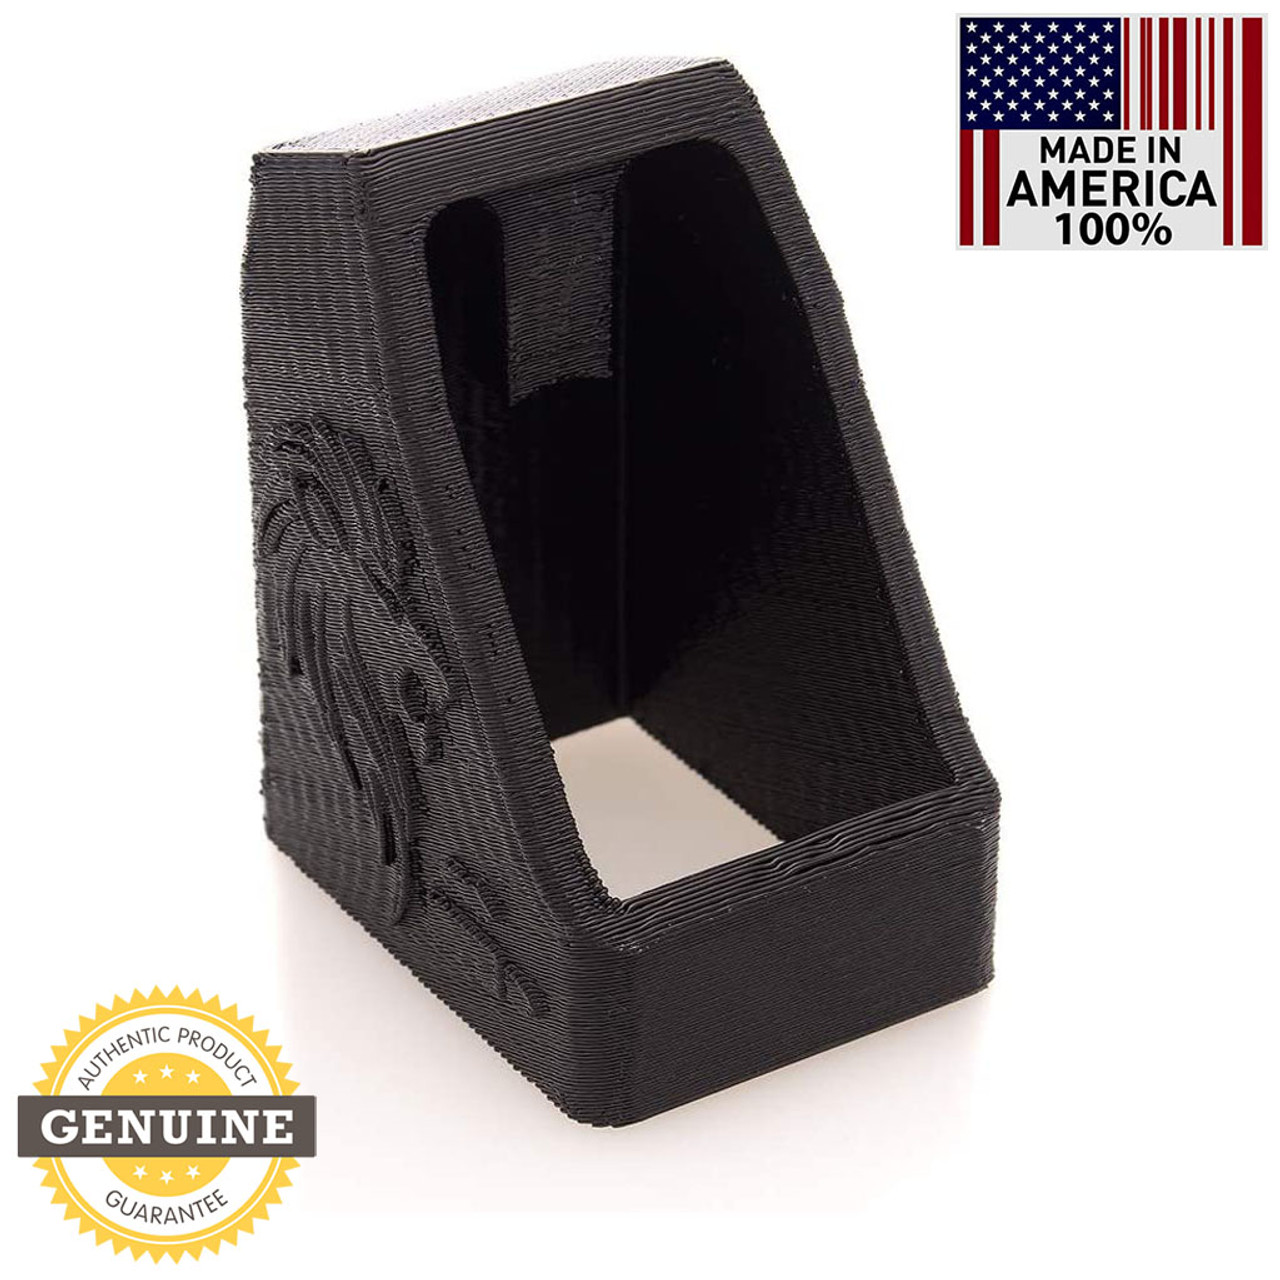 RAEIND Magazine Quick Ammo Speed Loader For EAA Sar K2 .45ACP Made In USA 